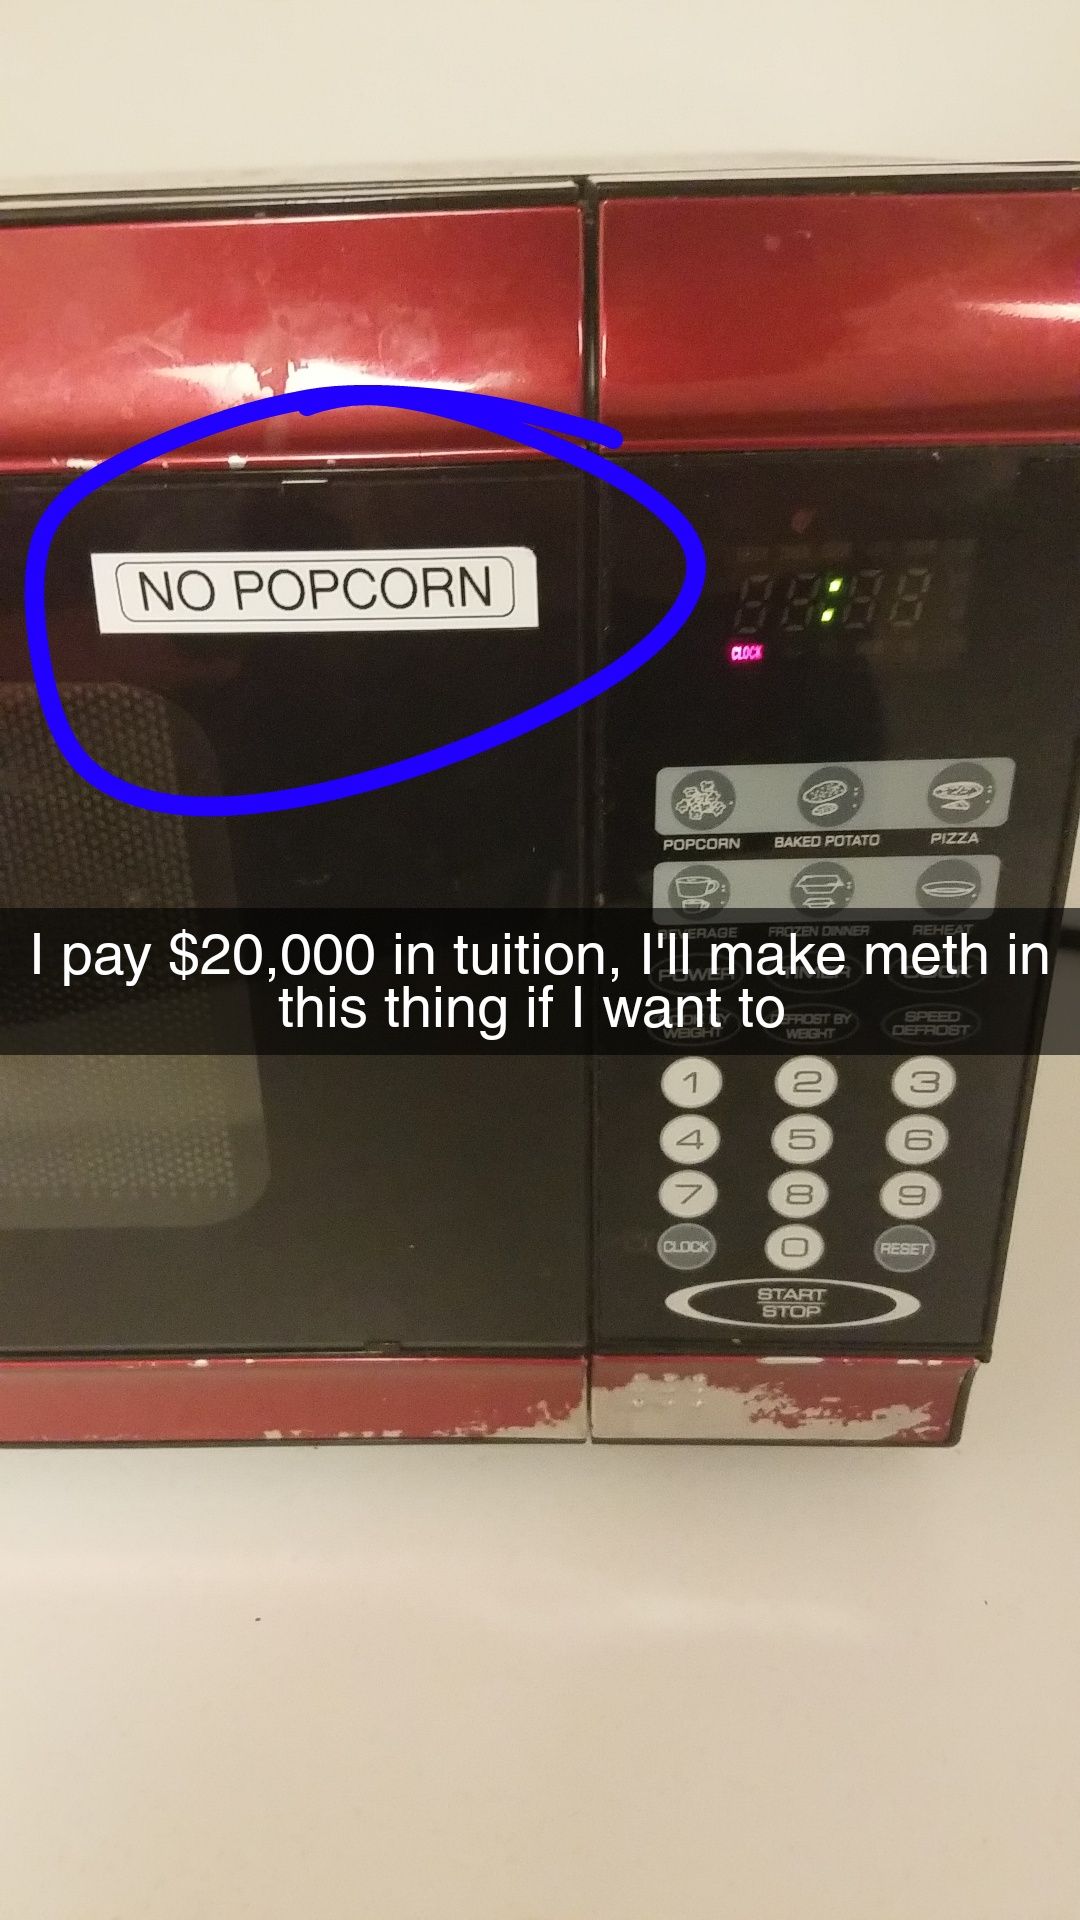 My college doesn't want us to make popcorn in their shitty microwaves